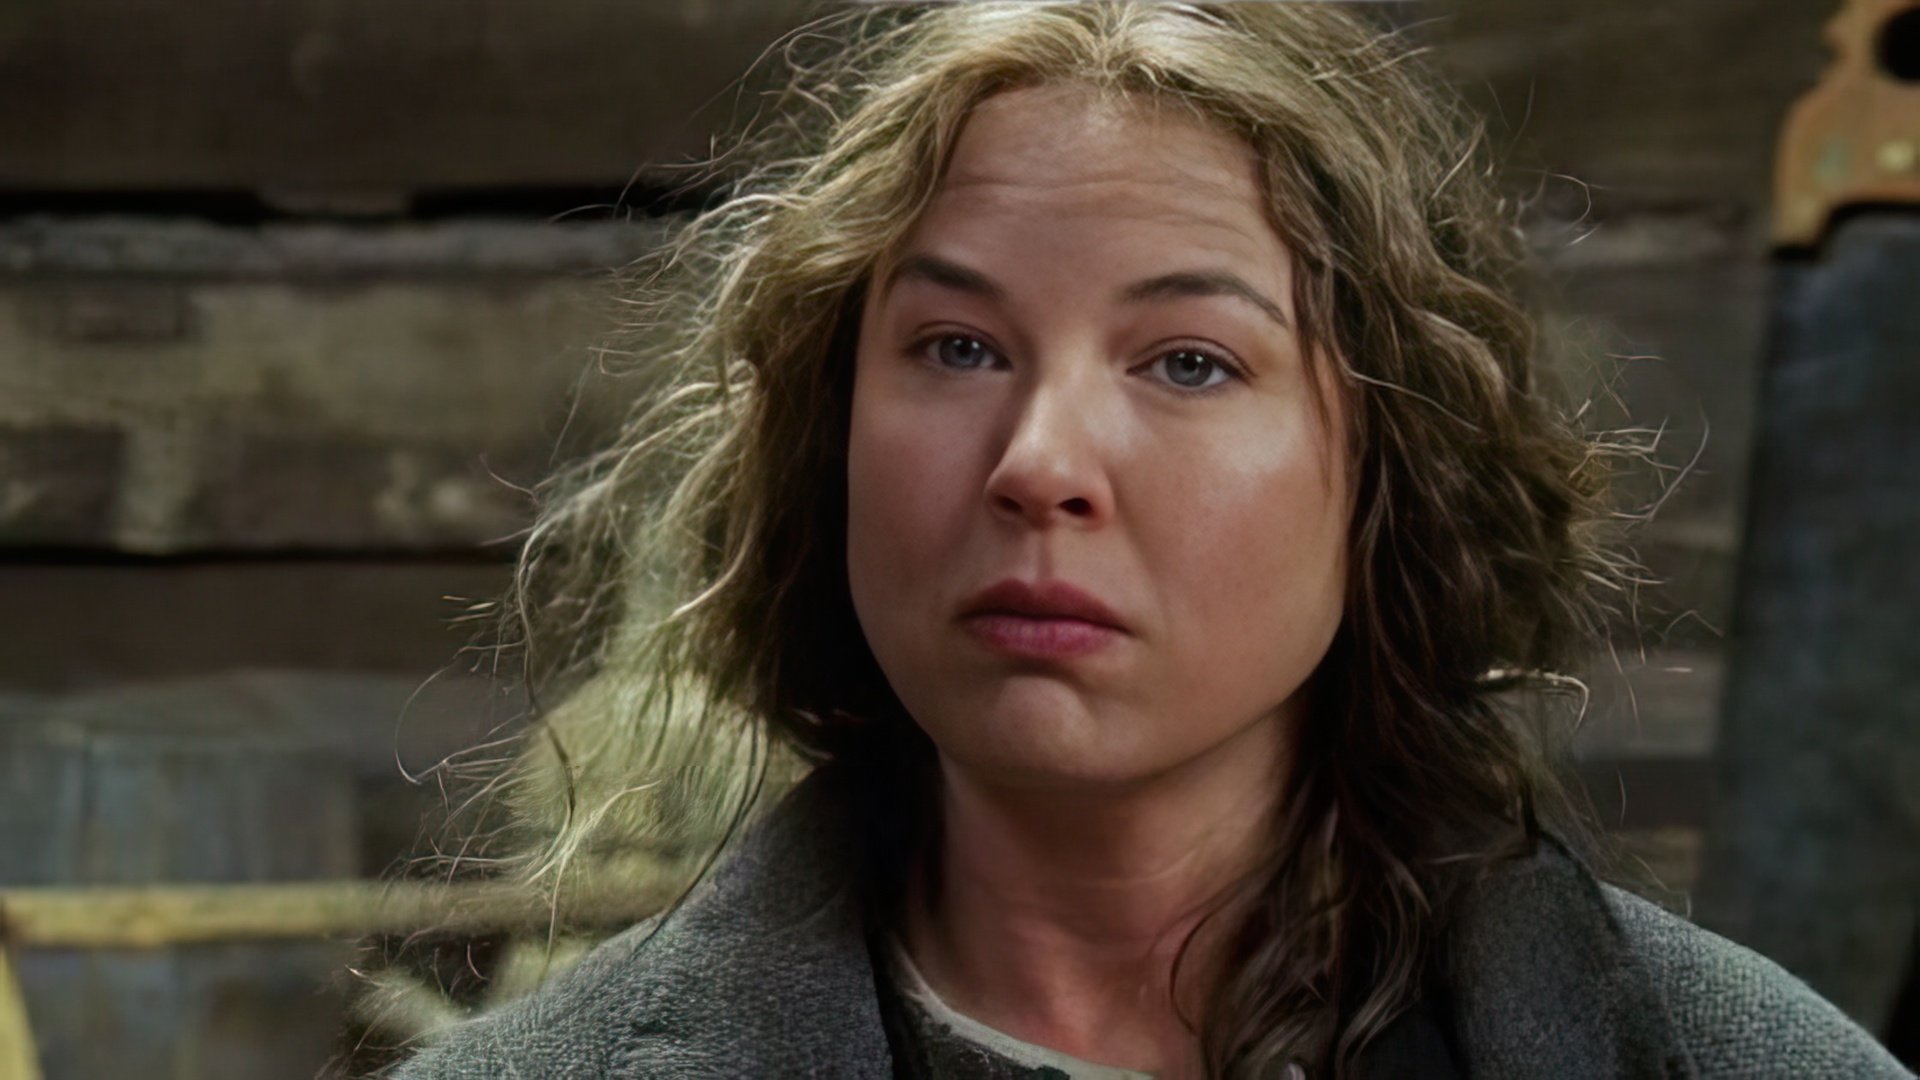 Renee Zellweger won an Oscar for her role as Ruby in Cold Mountain